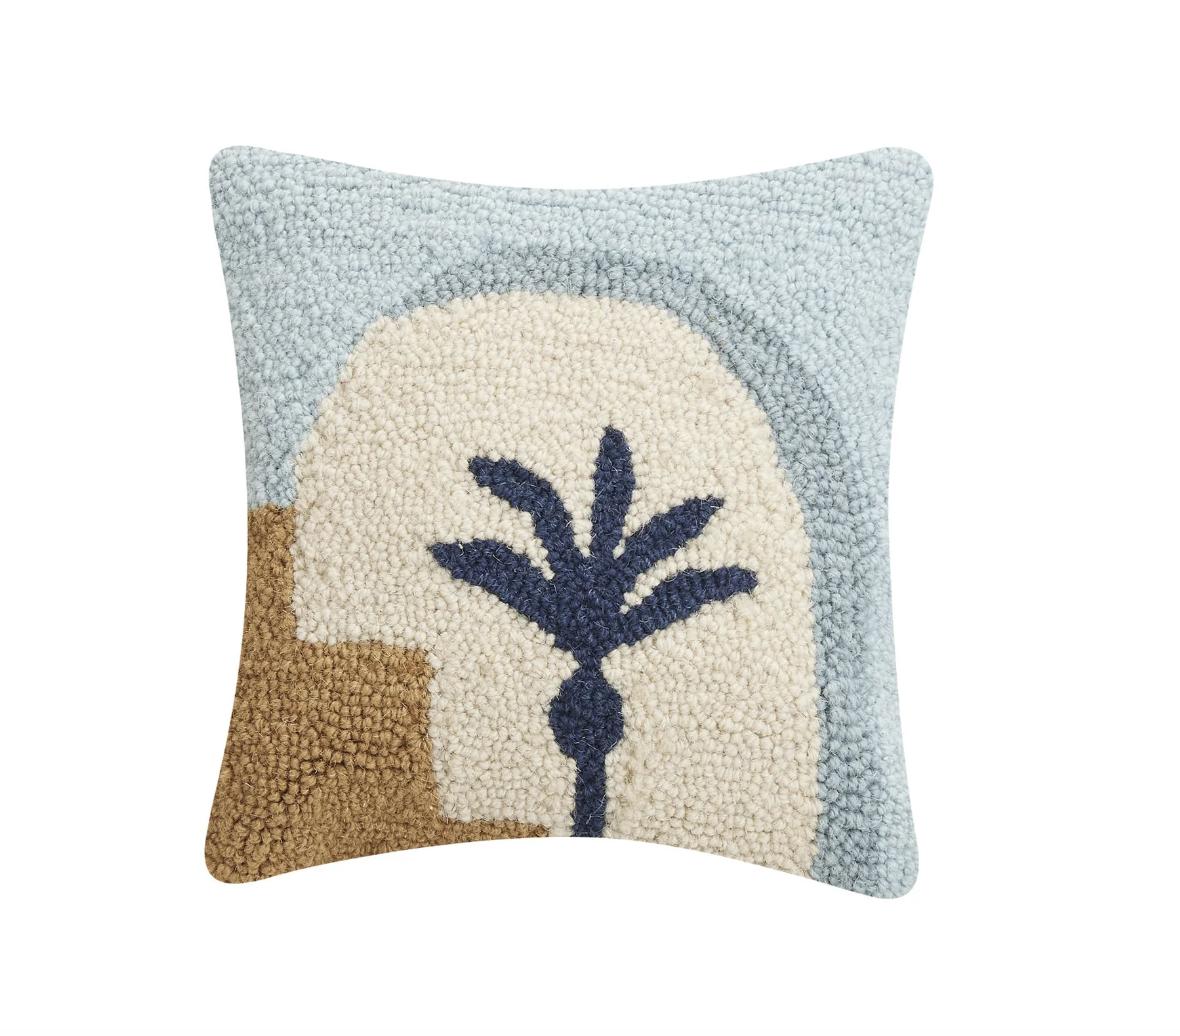 01. Stairs &amp; Palm Hook Pillow